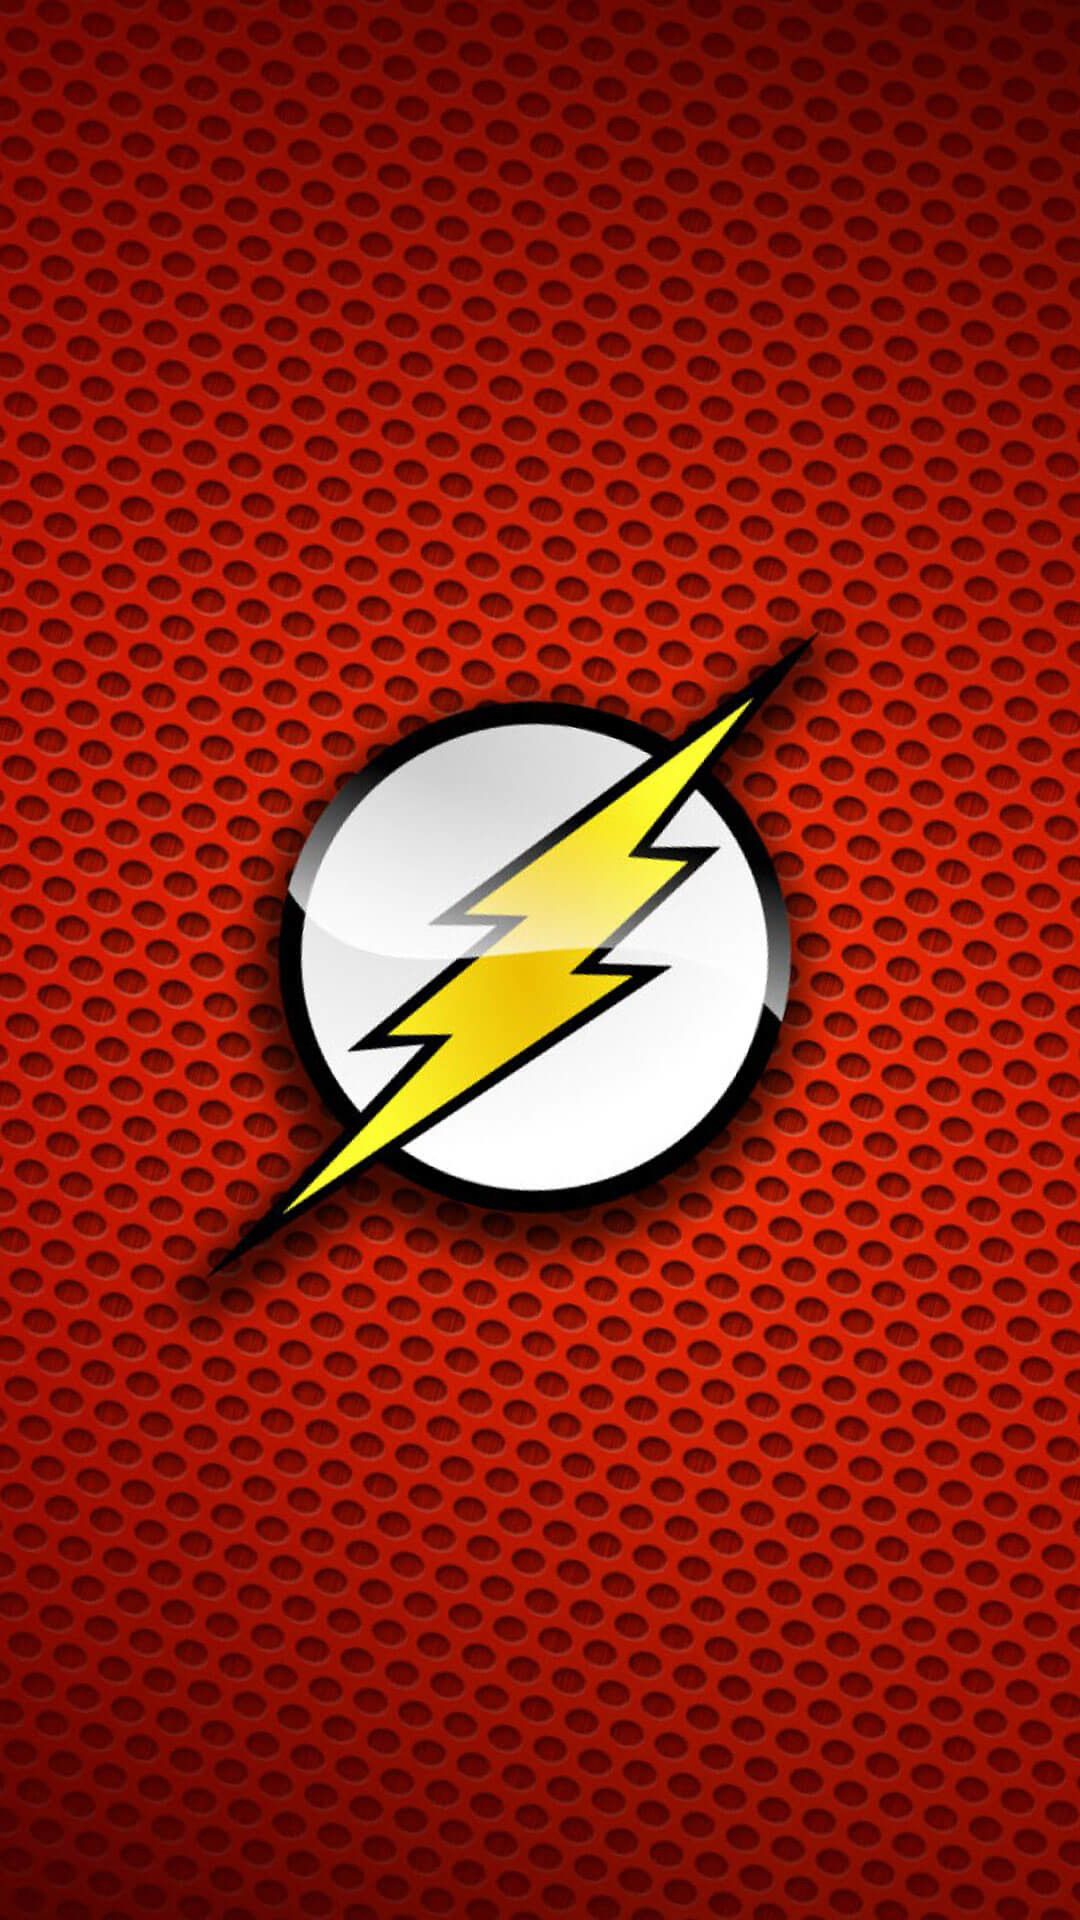 1080x1920 The Flash Logo iPhone 6 Wallpaper, iPhone 5, iPhone 6, iPhone 6s,